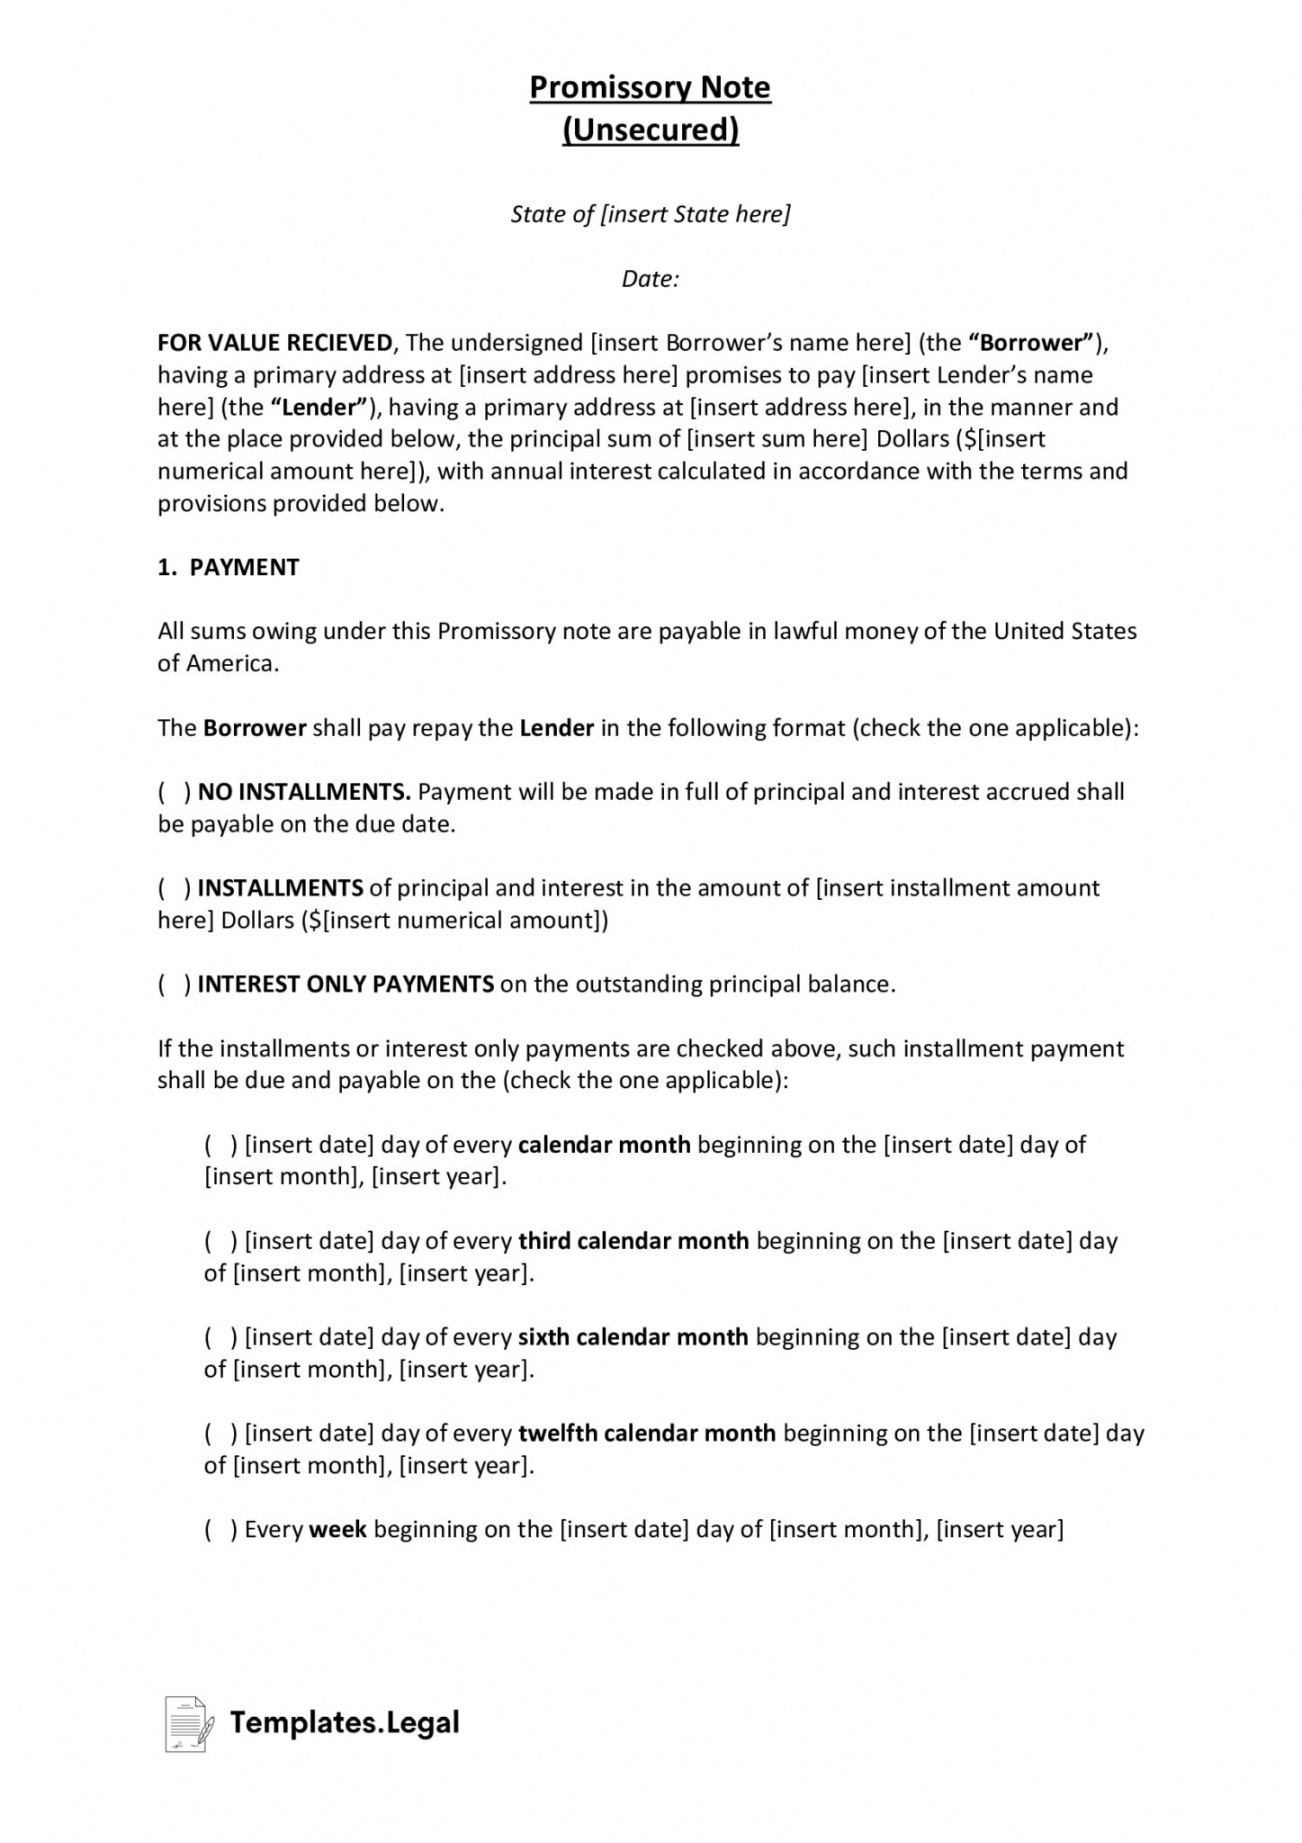 unsecured promissory note templates free [word pdf odt] promissory note template louisiana pdf